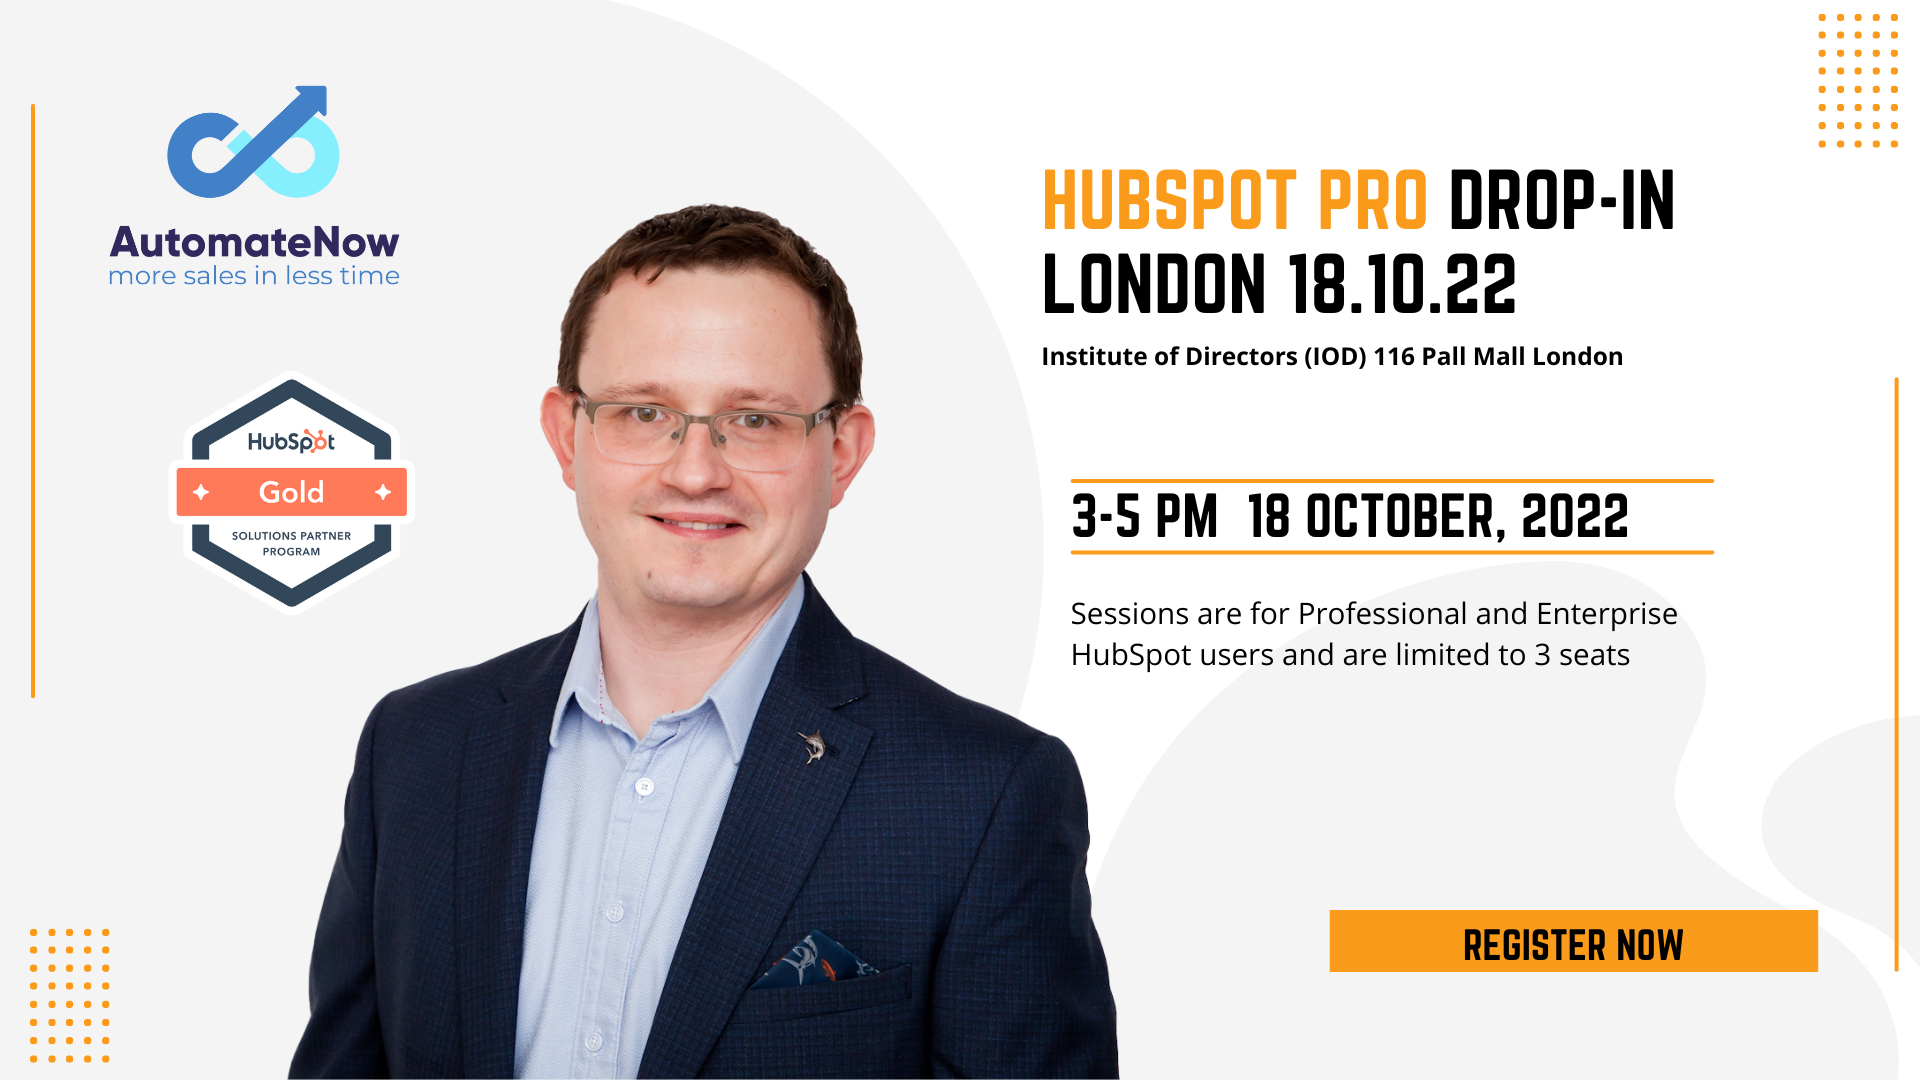 HubSpot Pro Drop-in Session London 18.10.22